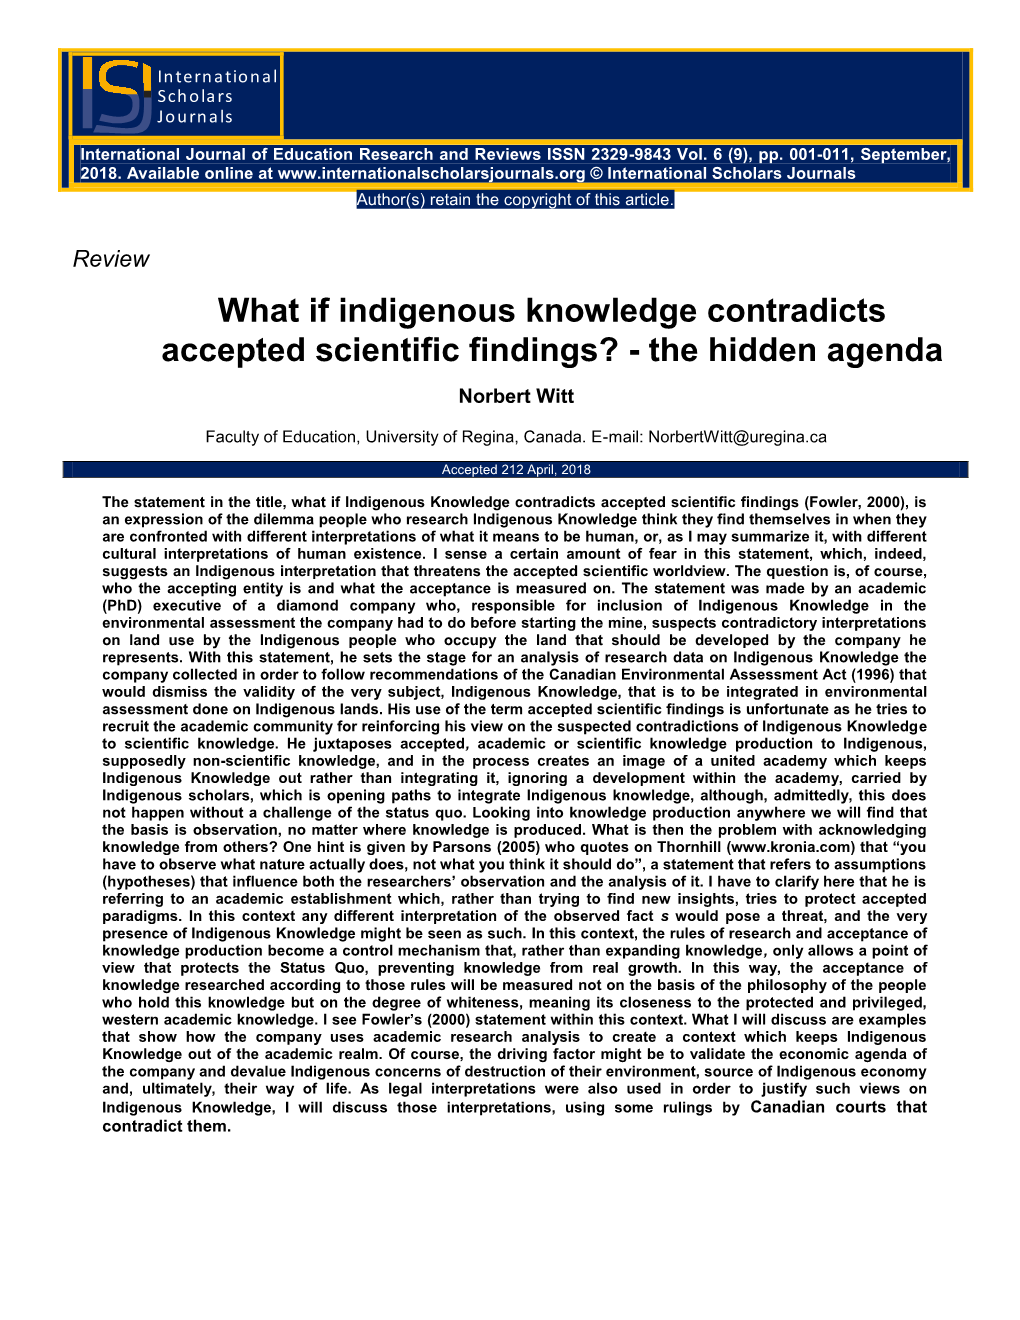 What If Indigenous Knowledge Contradicts Accepted Scientific Findings? - the Hidden Agenda